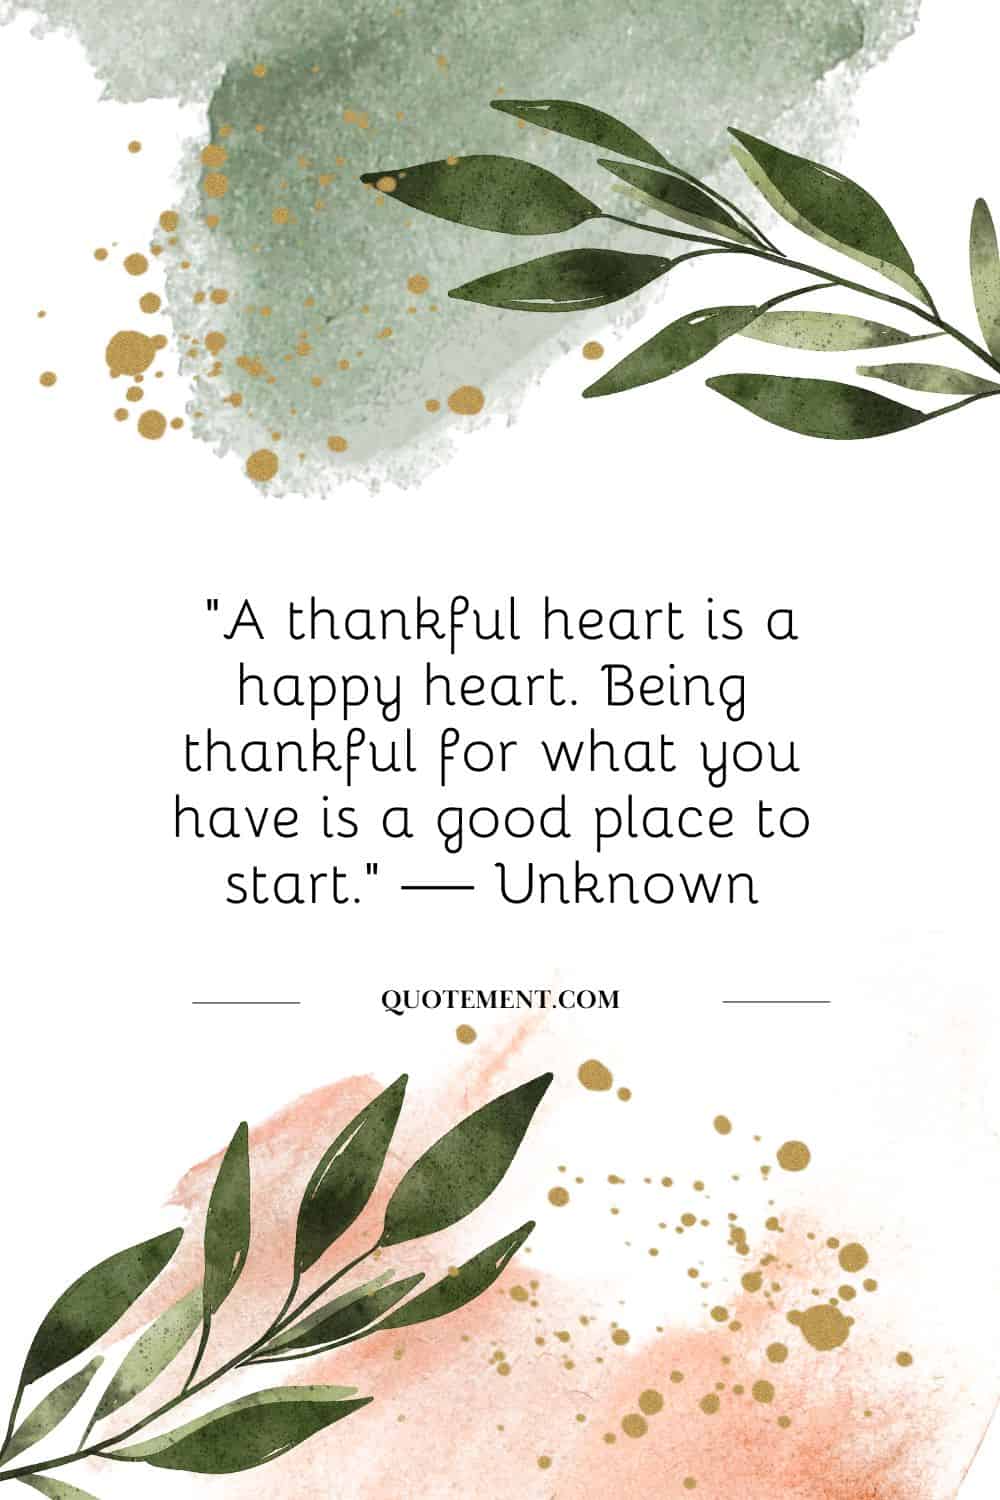 “A thankful heart is a happy heart. Being thankful for what you have is a good place to start.” — Unknown